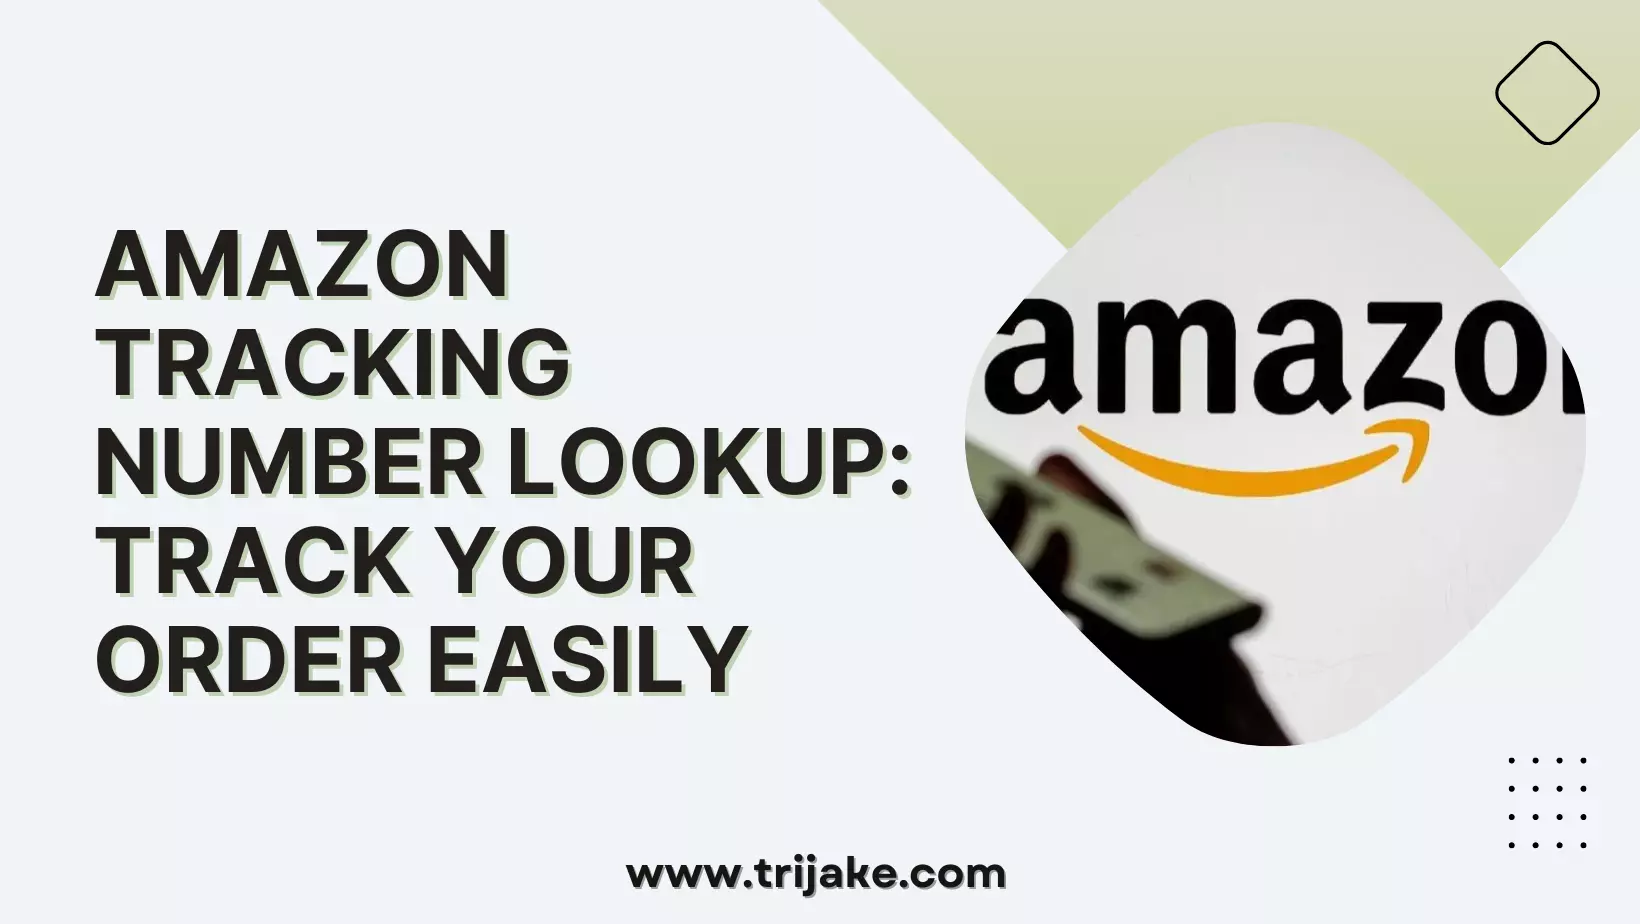 Amazon Tracking Number Lookup